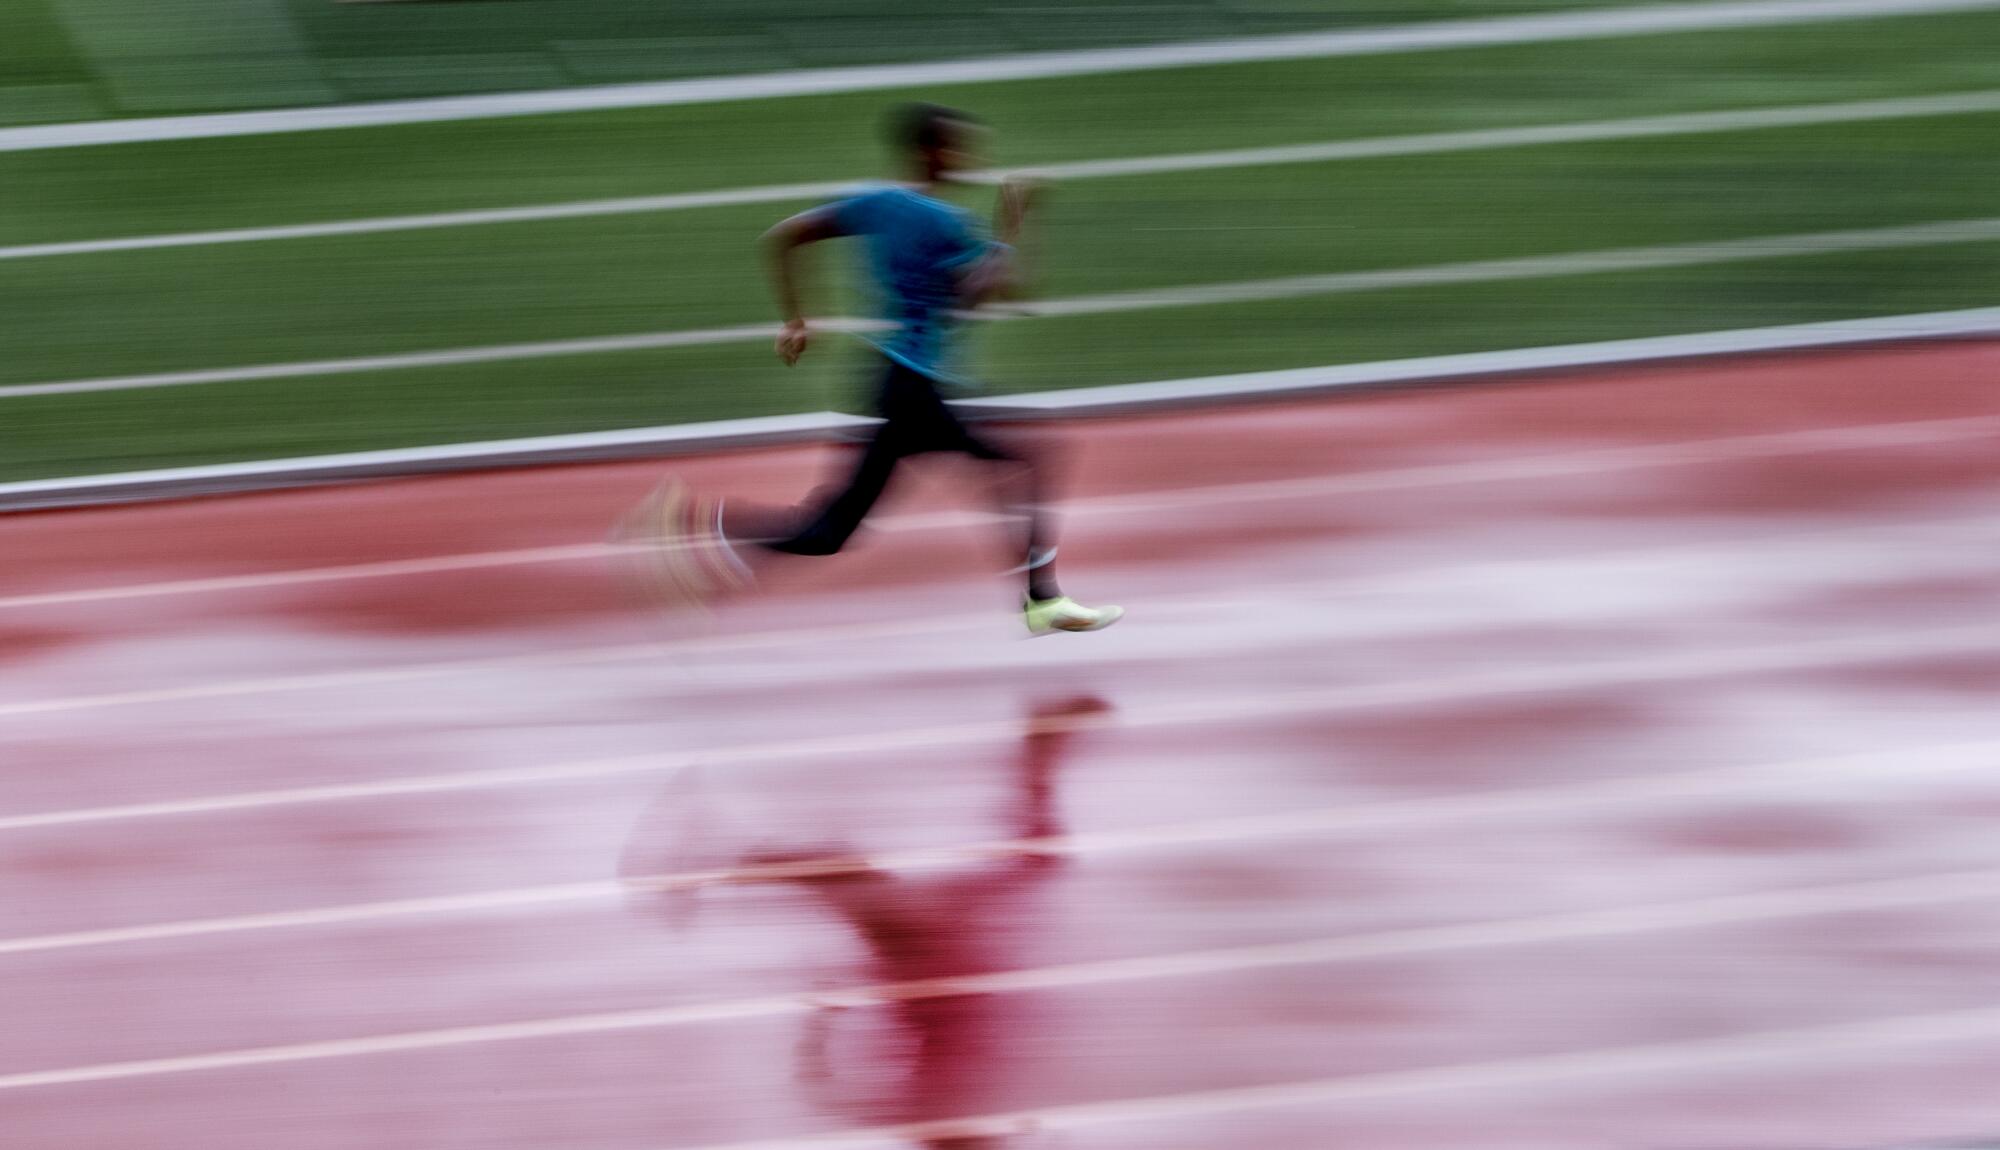 A runner on a wet track.